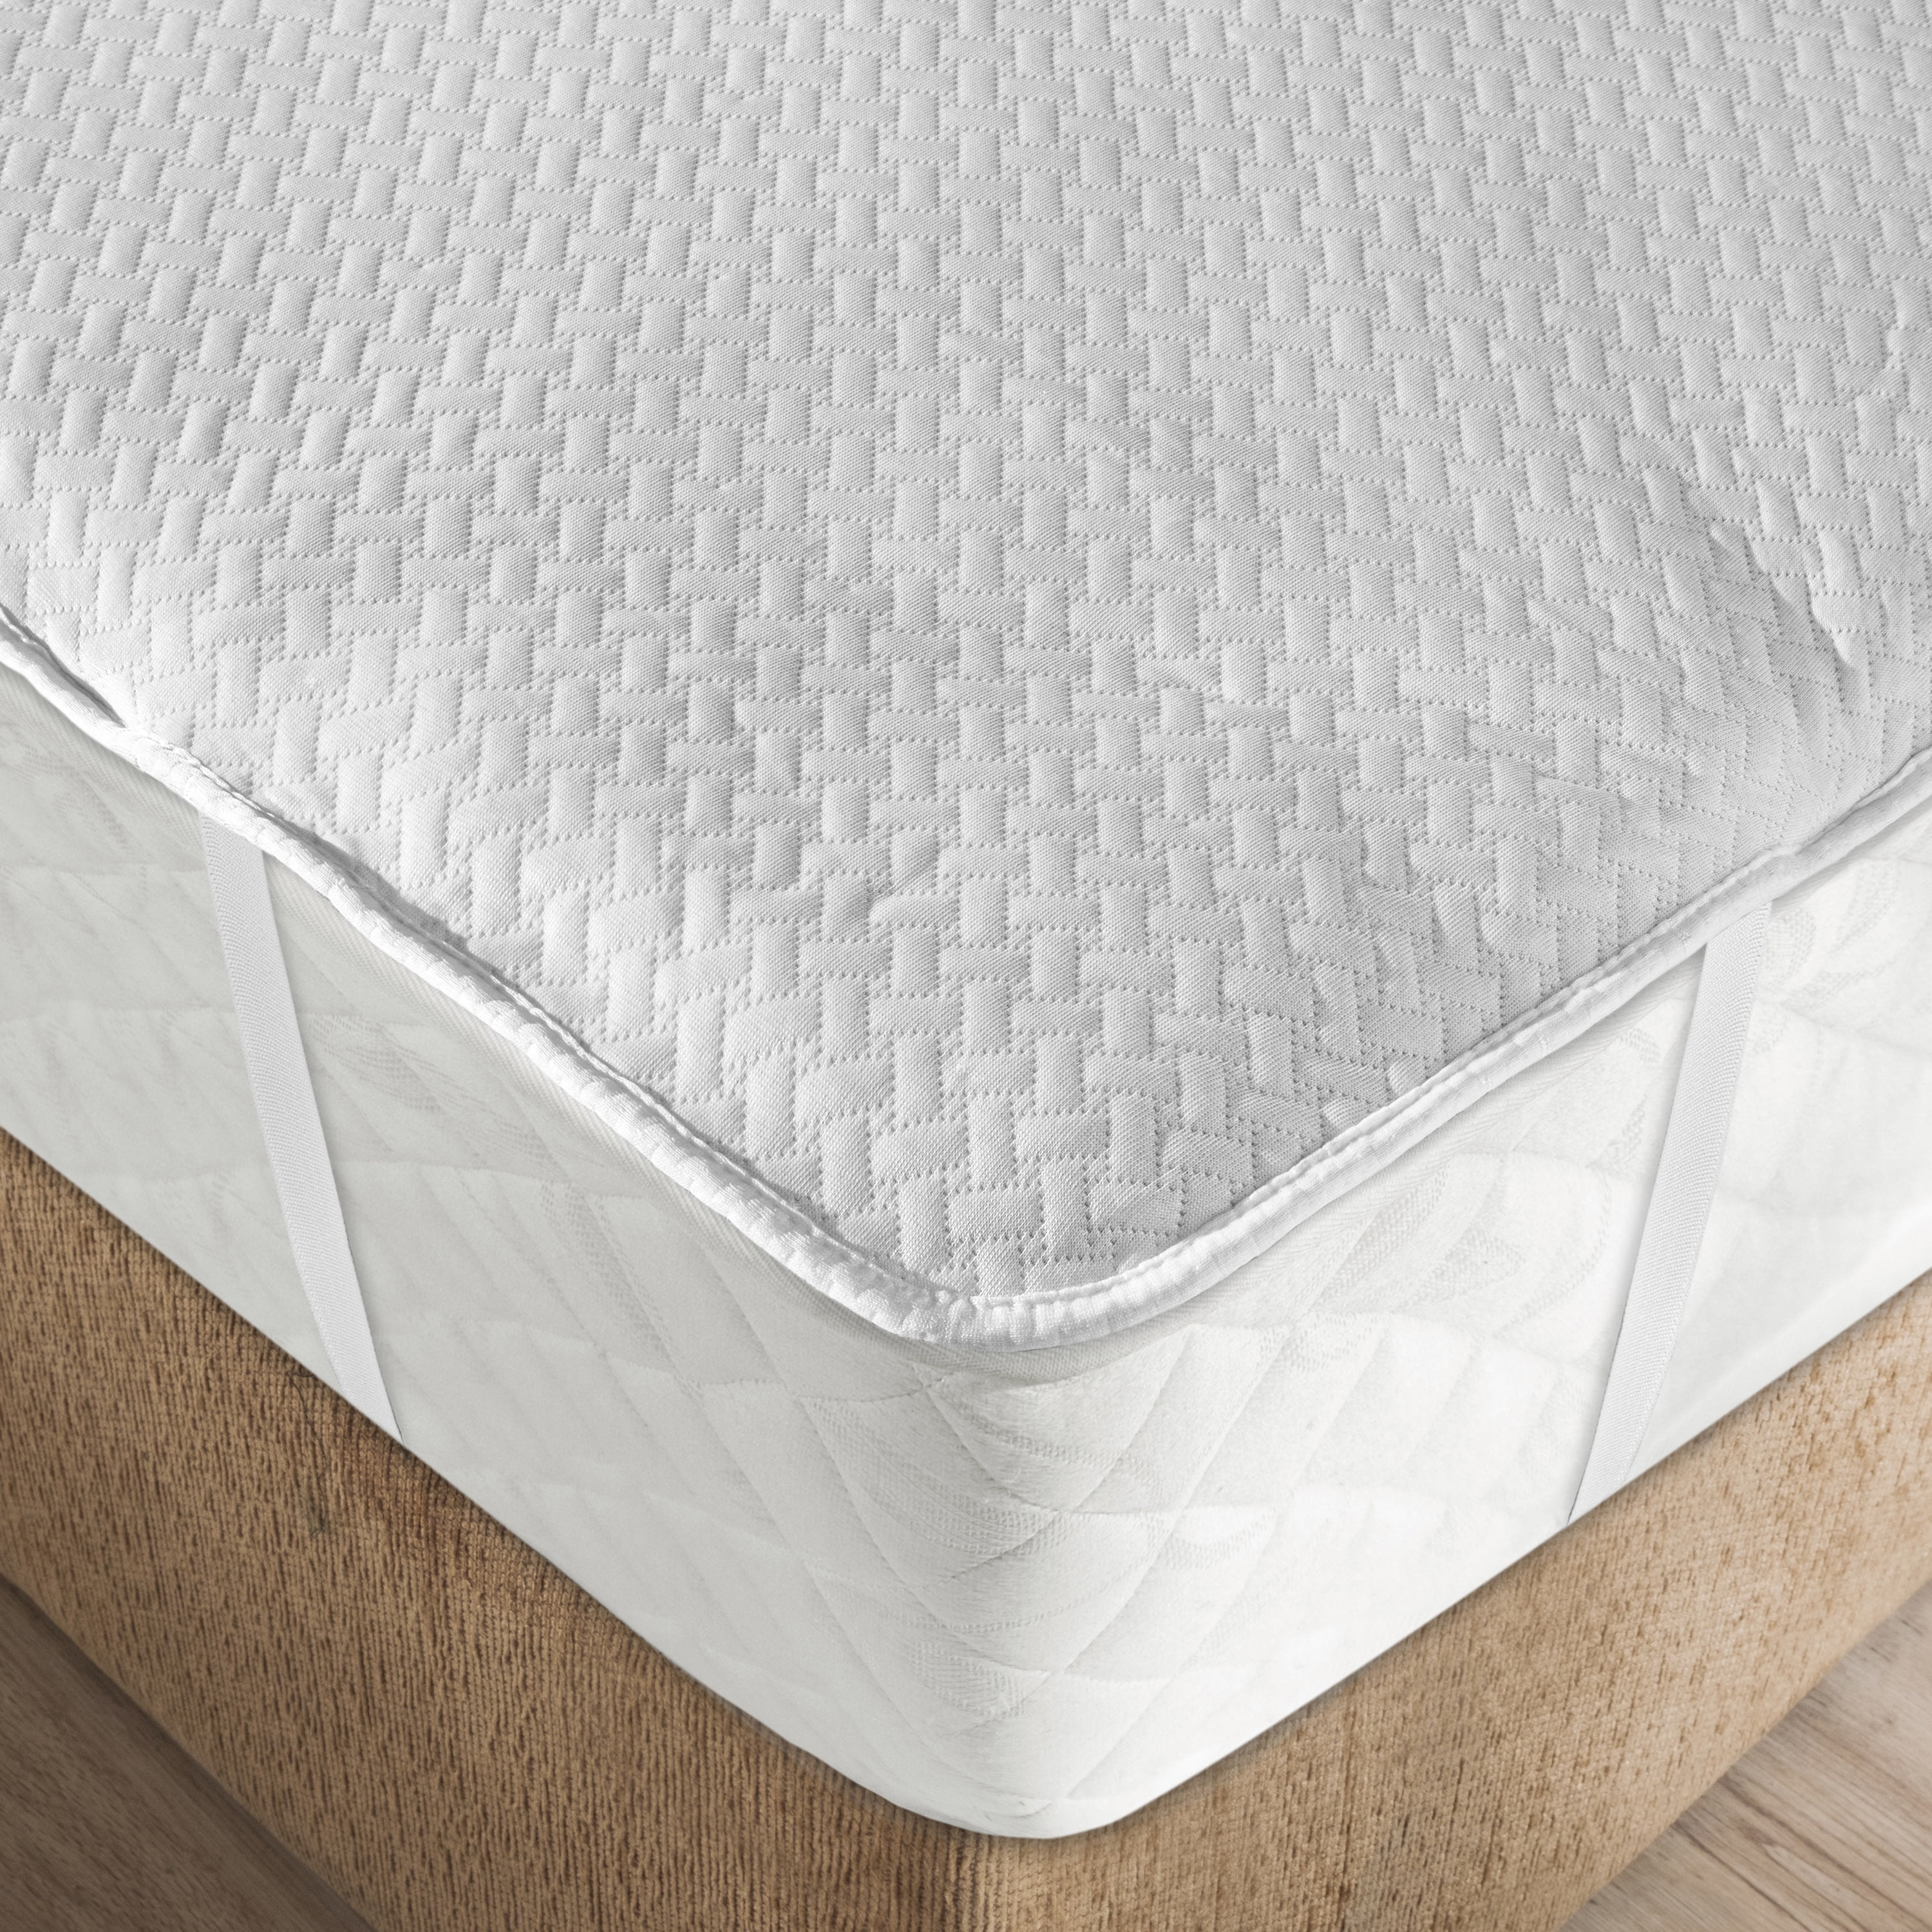 LUX MATTRESS PROTECTOR FLEECE UNDER BLANKET LUXURY EXTRA DEEP FITTED BED COVER 